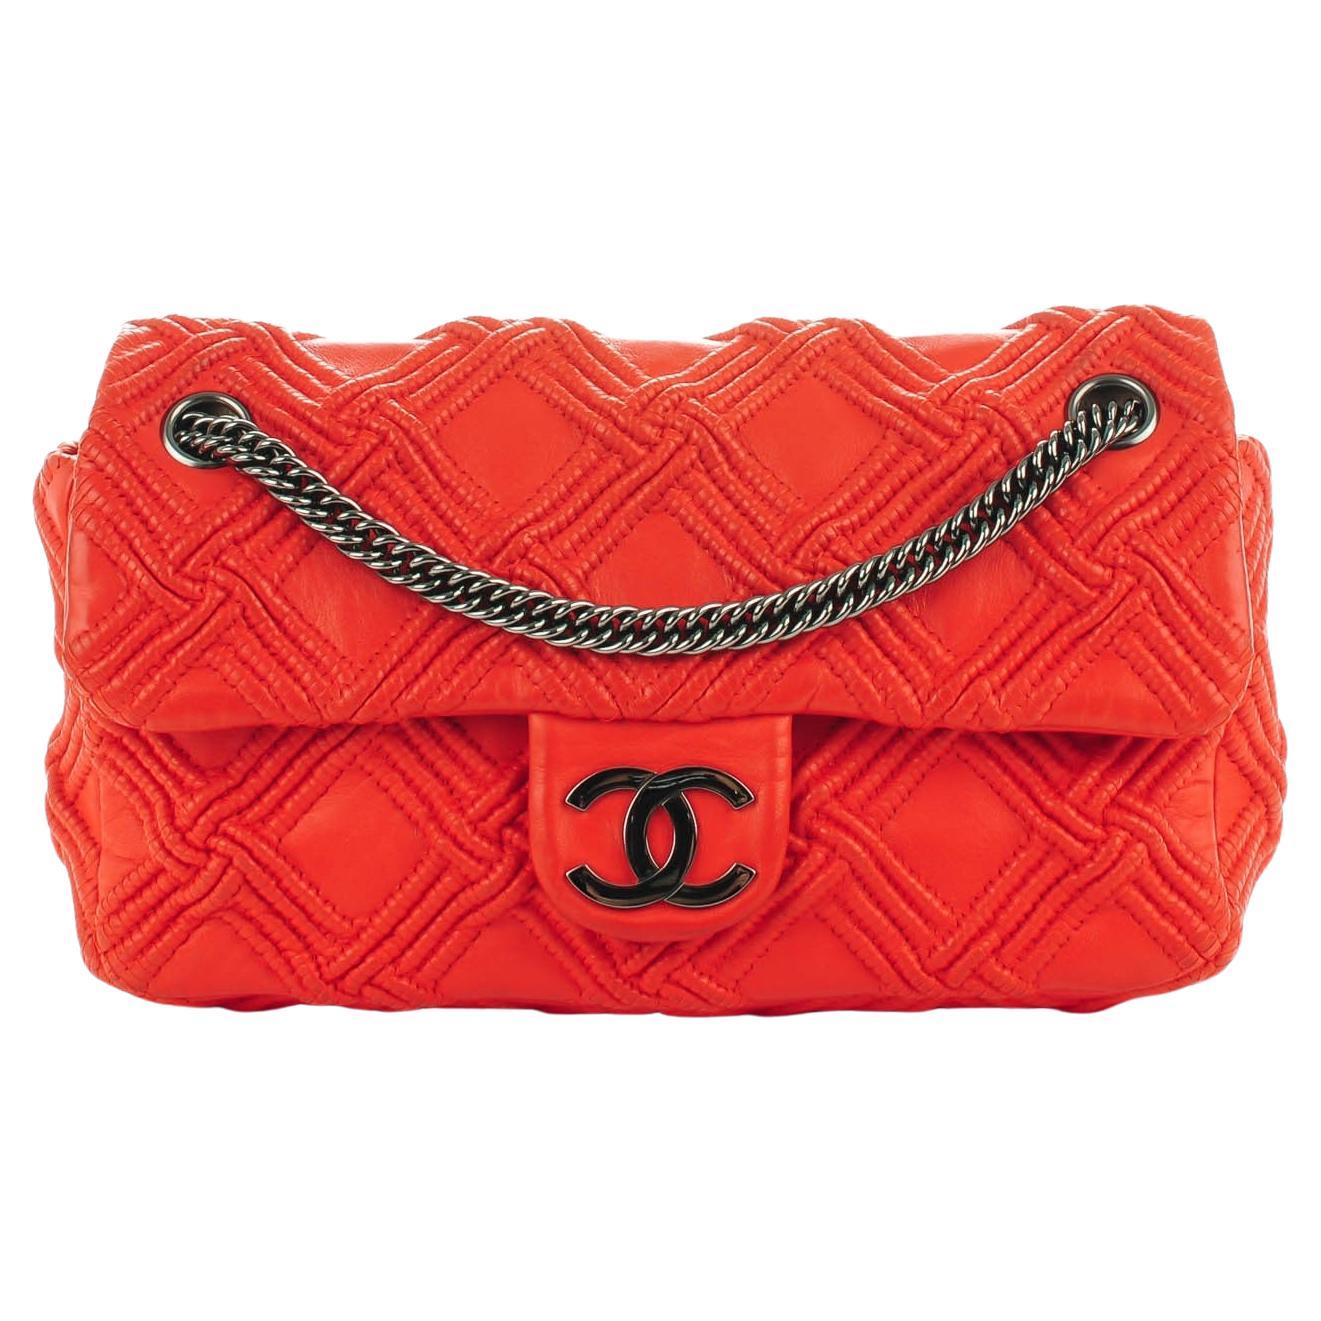 Chanel 2006 Rare Neon Red Coral Soft Lambskin Stitched Medium Classic Flap Bag For Sale